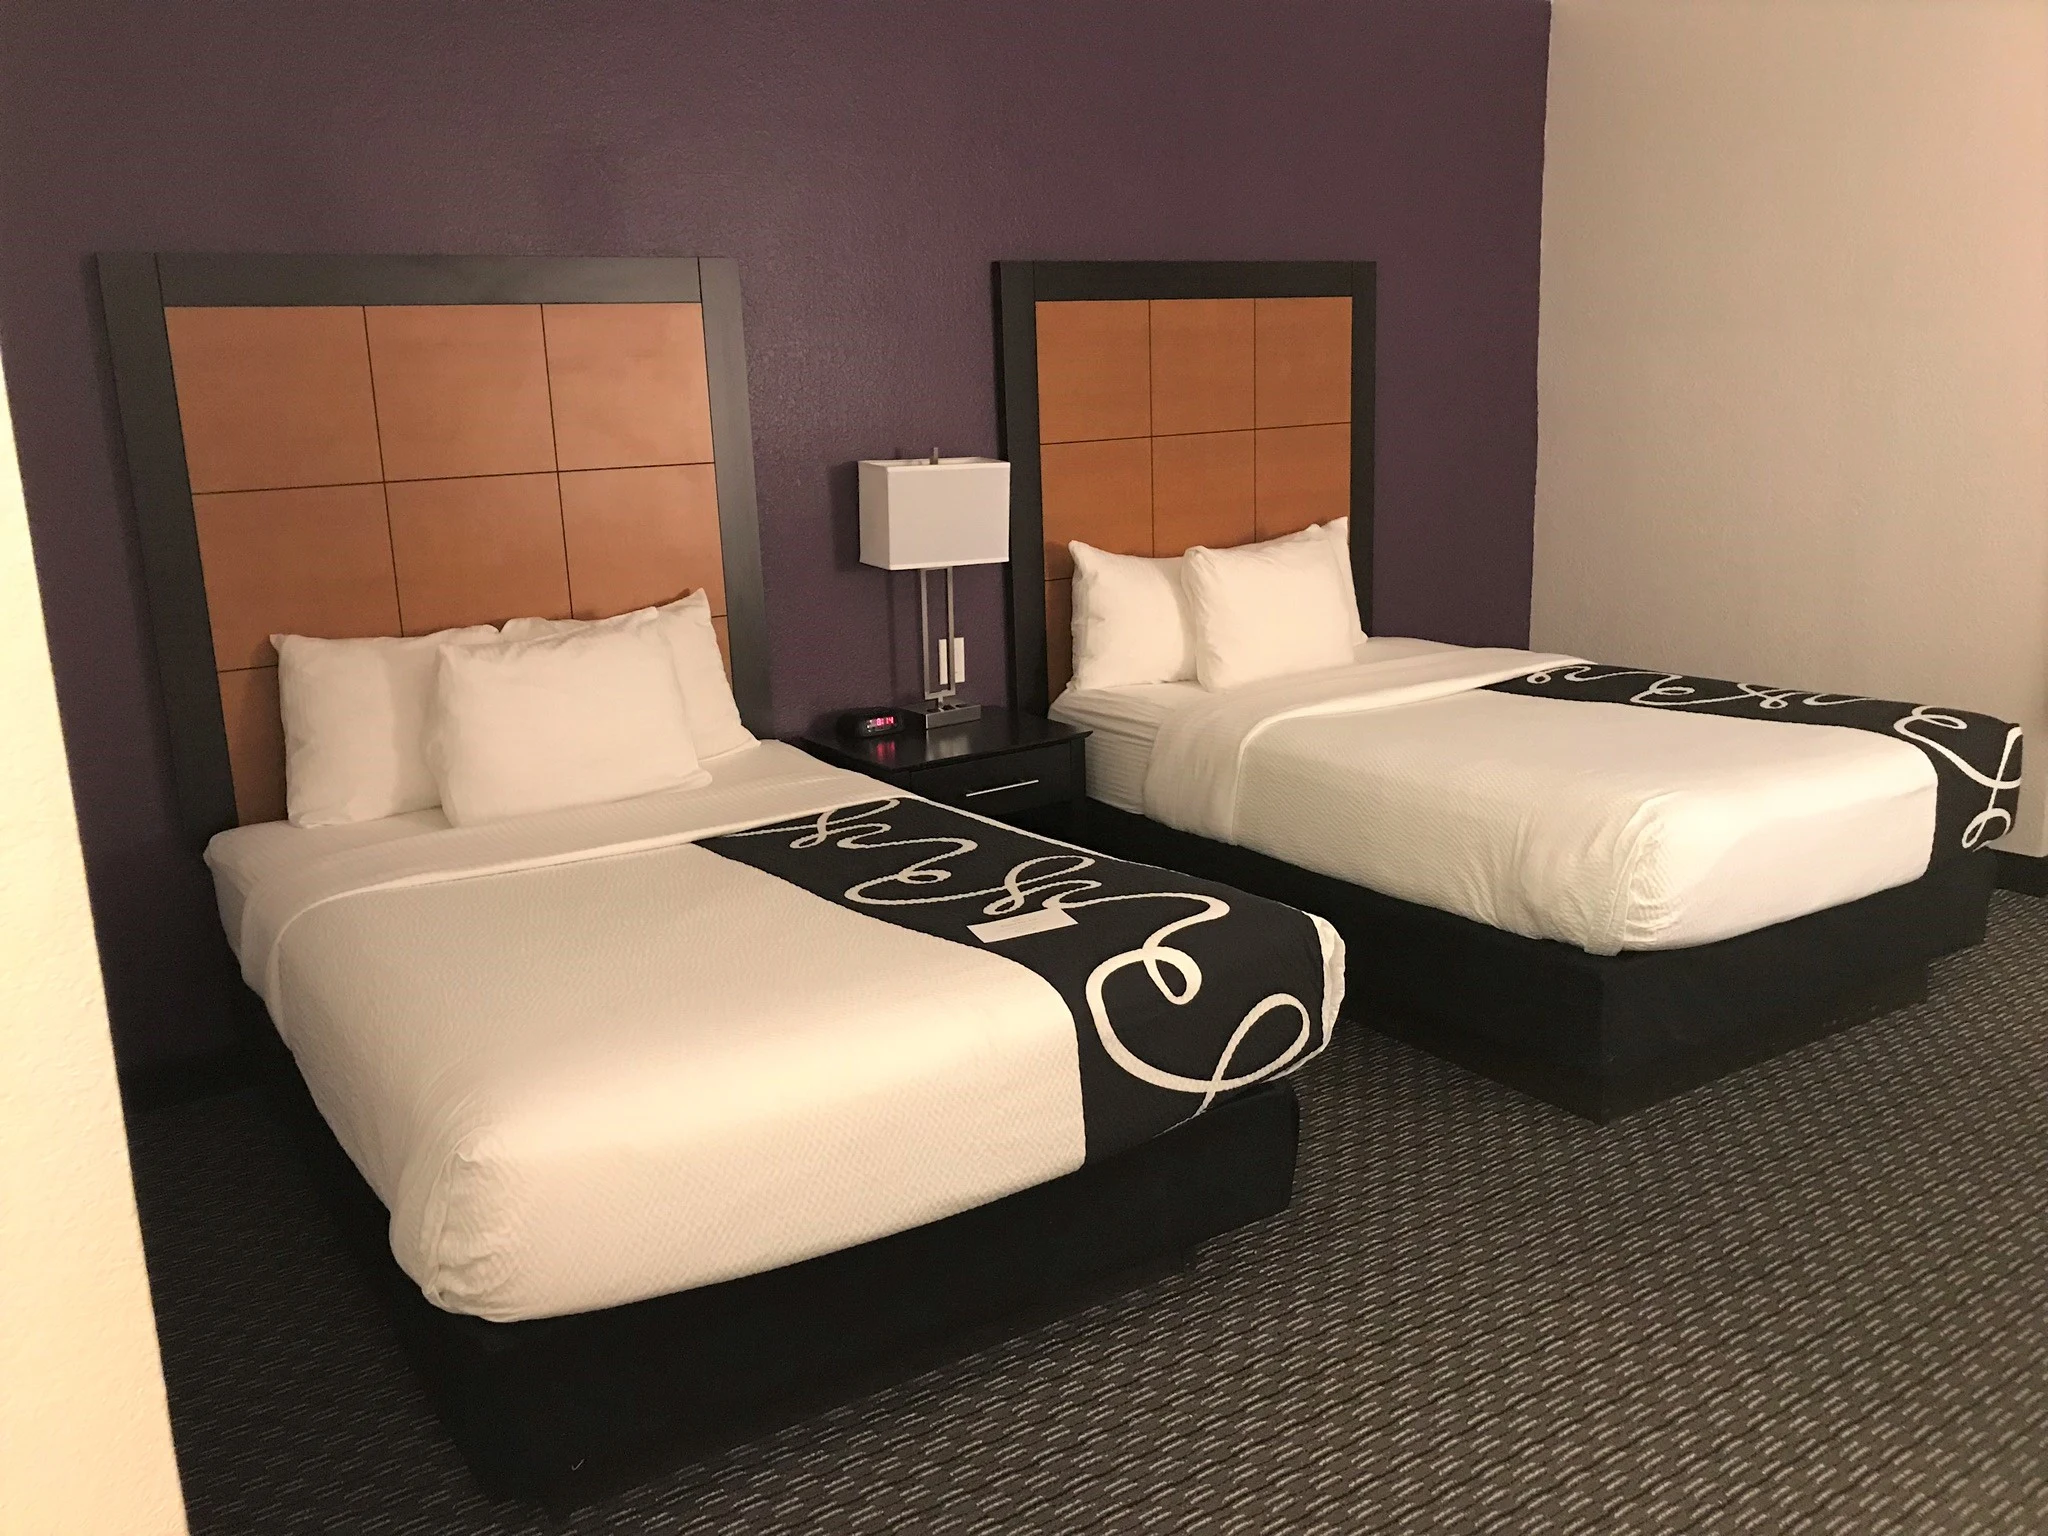 two beds in a room at LaQuinta hotel near the airport